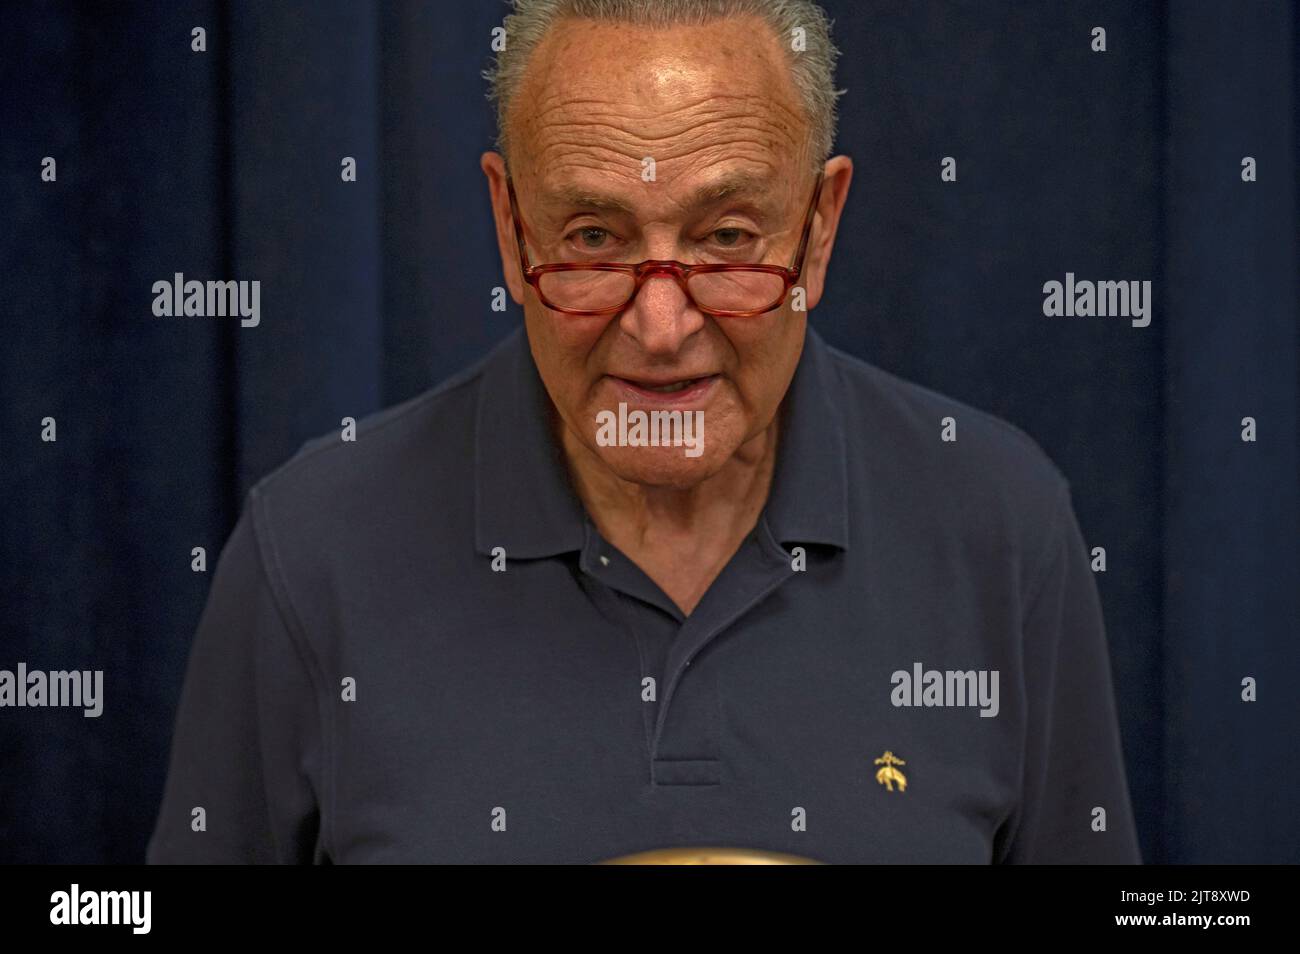 NEW YORK, NEW YORK - AUGUST 29: Senate Majority Leader, U.S. Senator Chuck Schumer (D-NY), called Sunday for loan service companies to 'staff up' in response to President Joe Biden's student debt forgiveness plan announced last week on August 28, 2022 in New York City. The Senate majority leader celebrated the announced relief program on Aug. 28, for which Schumer noted that New York borrows would see a combined $16.3 billion in cancelled debt thanks to what he cites as a historic move and one he has long championed. Credit: Ron Adar/Alamy Live News Stock Photo